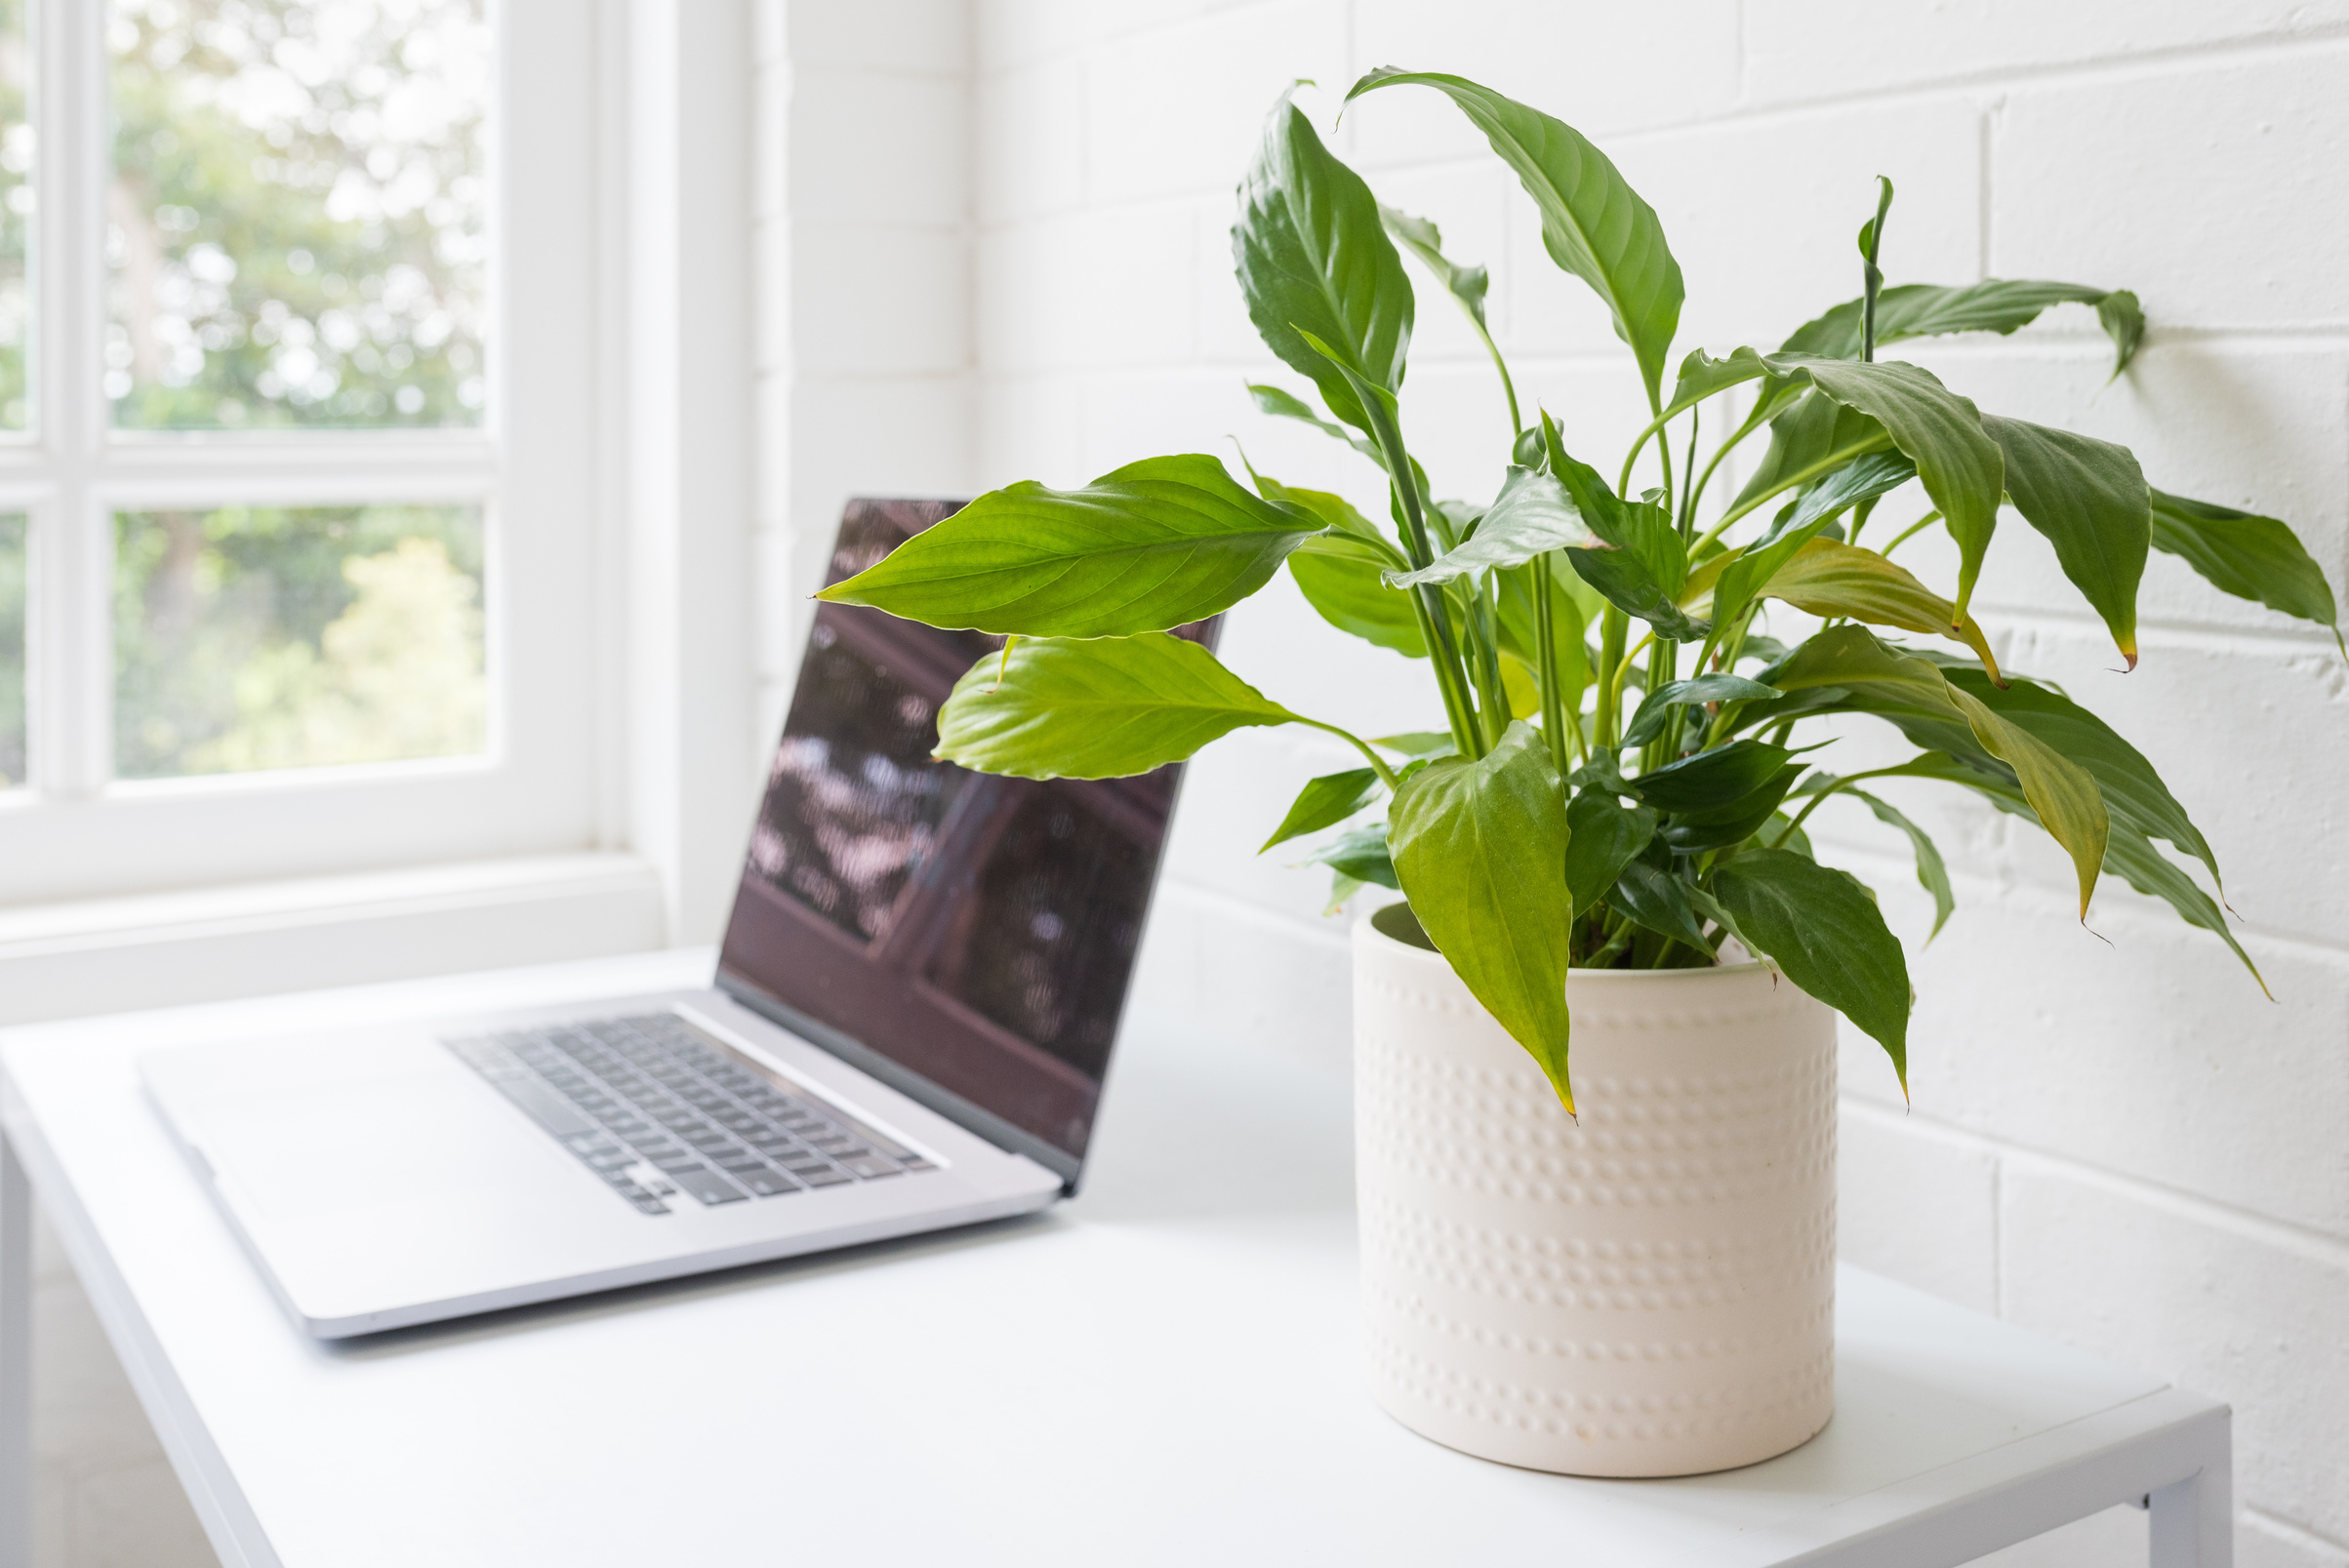 Green leafy pot plant on desk with laptop in background